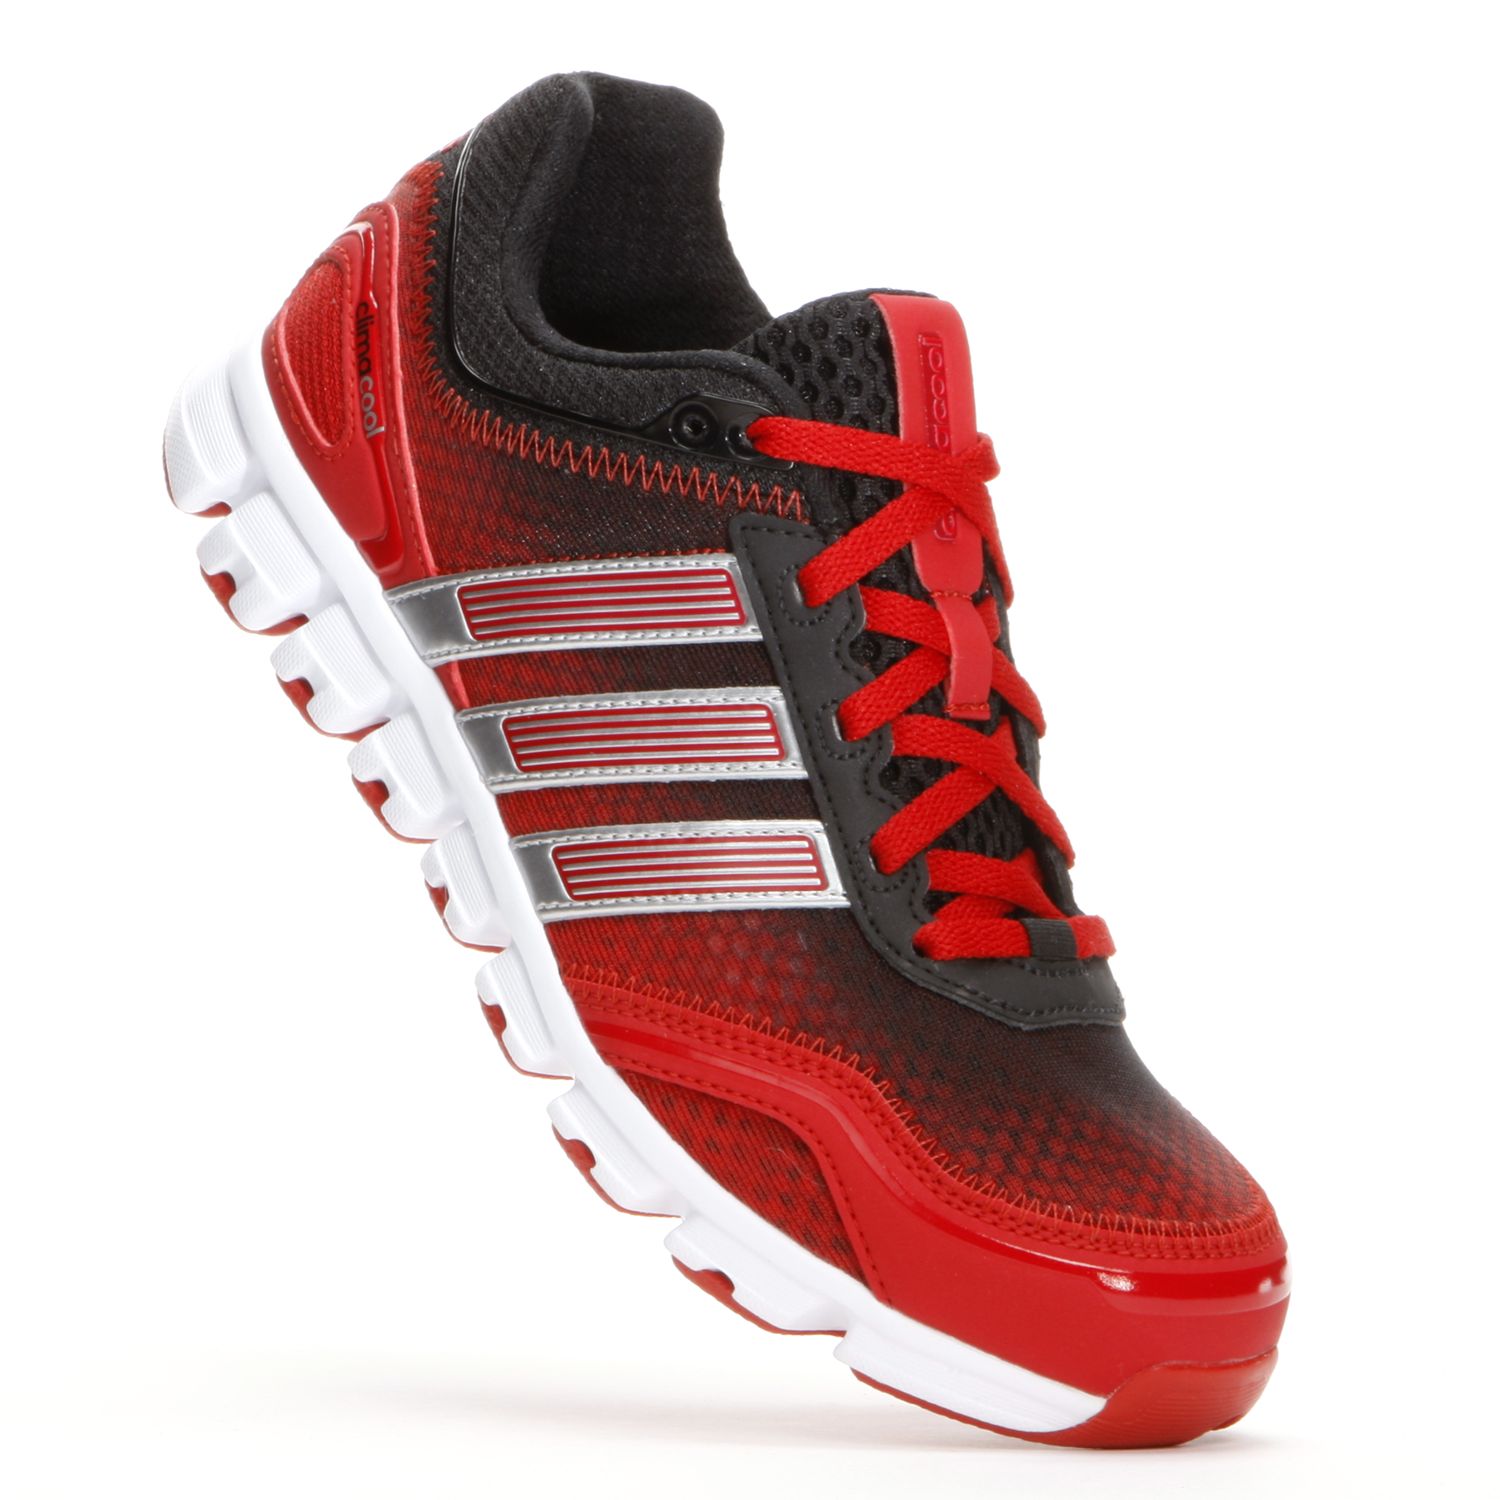 adidas climacool 5 running shoes 3.0